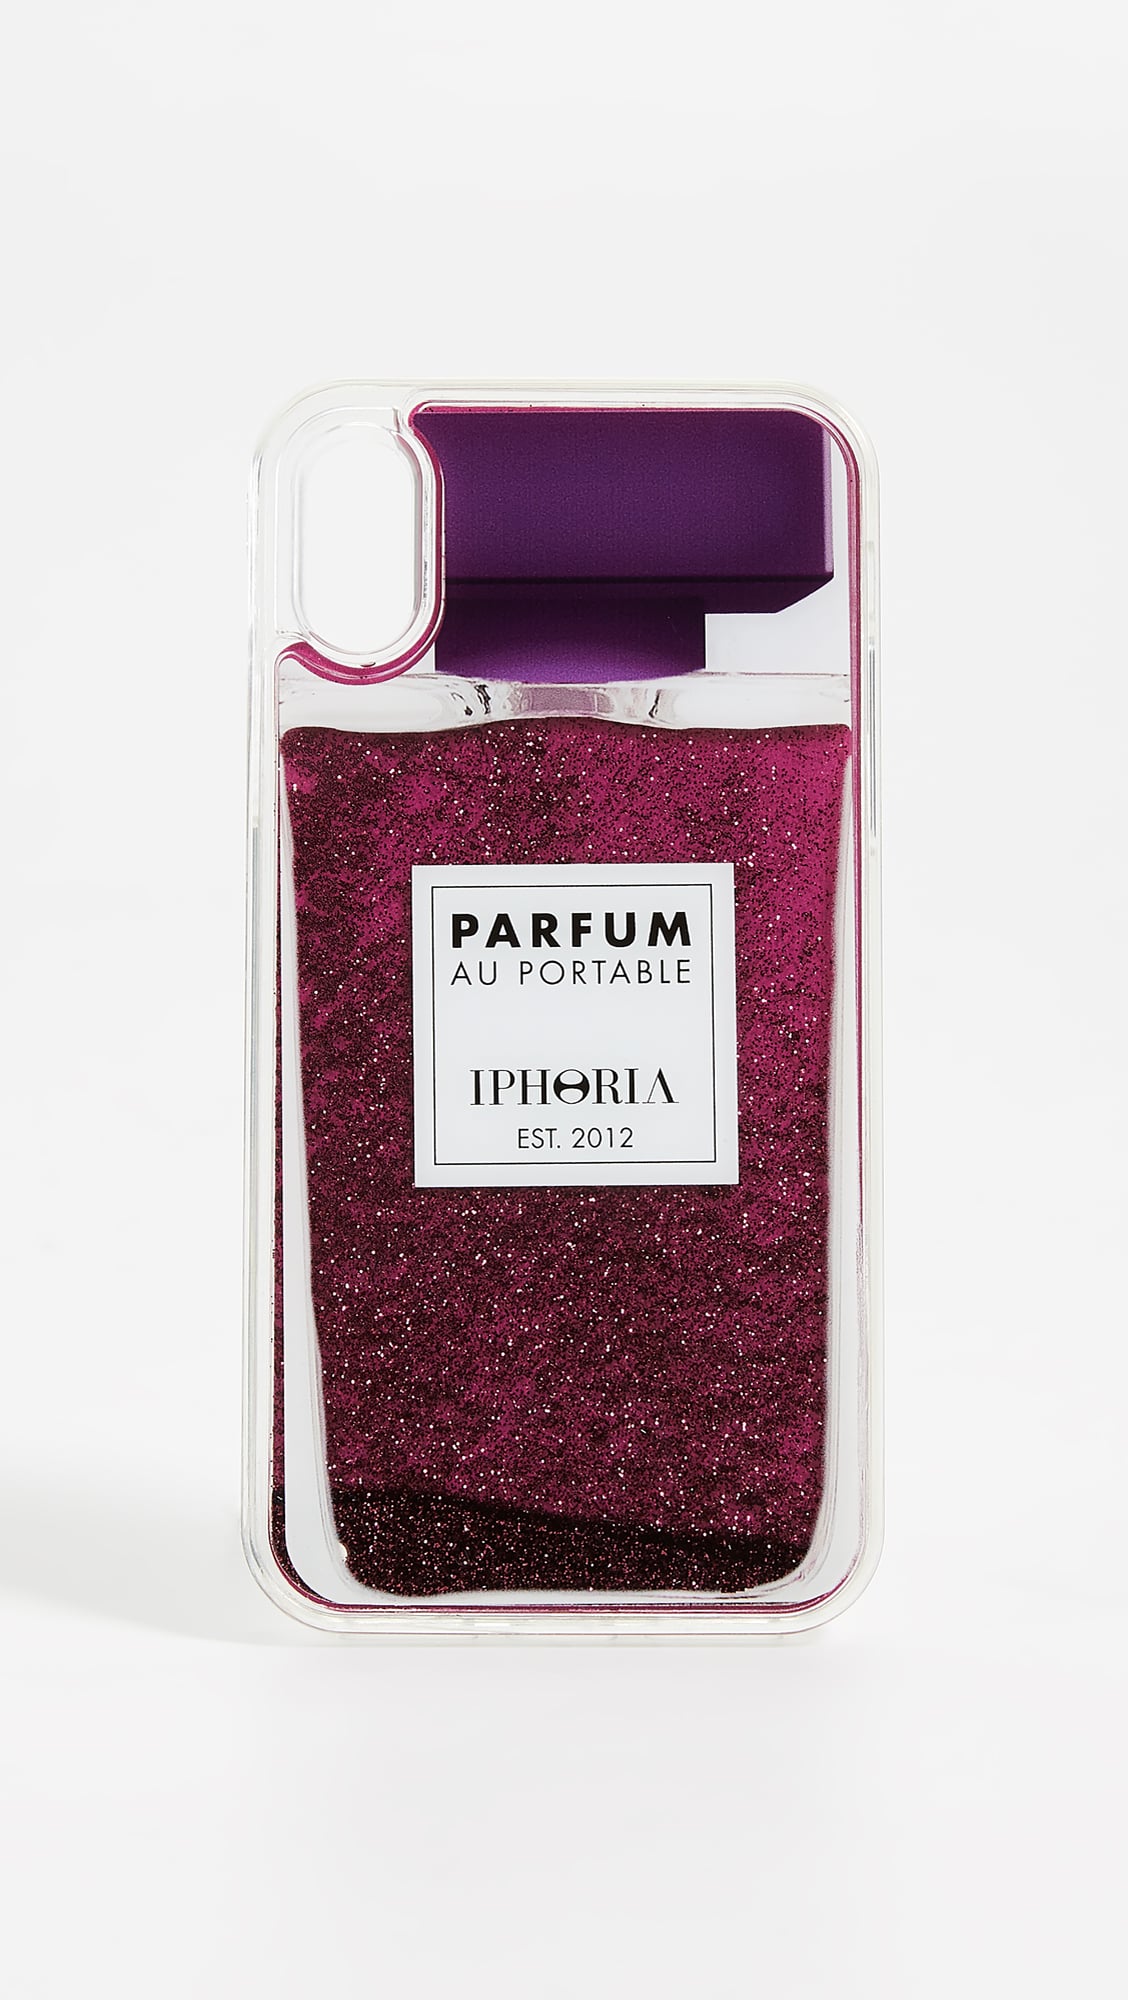 Iphoria Perfume Purple Iphone Xs X Case 50 Gifts So Thoughtful No One Will Ever Realize You Ordered Them Last Minute Popsugar Smart Living Photo 2